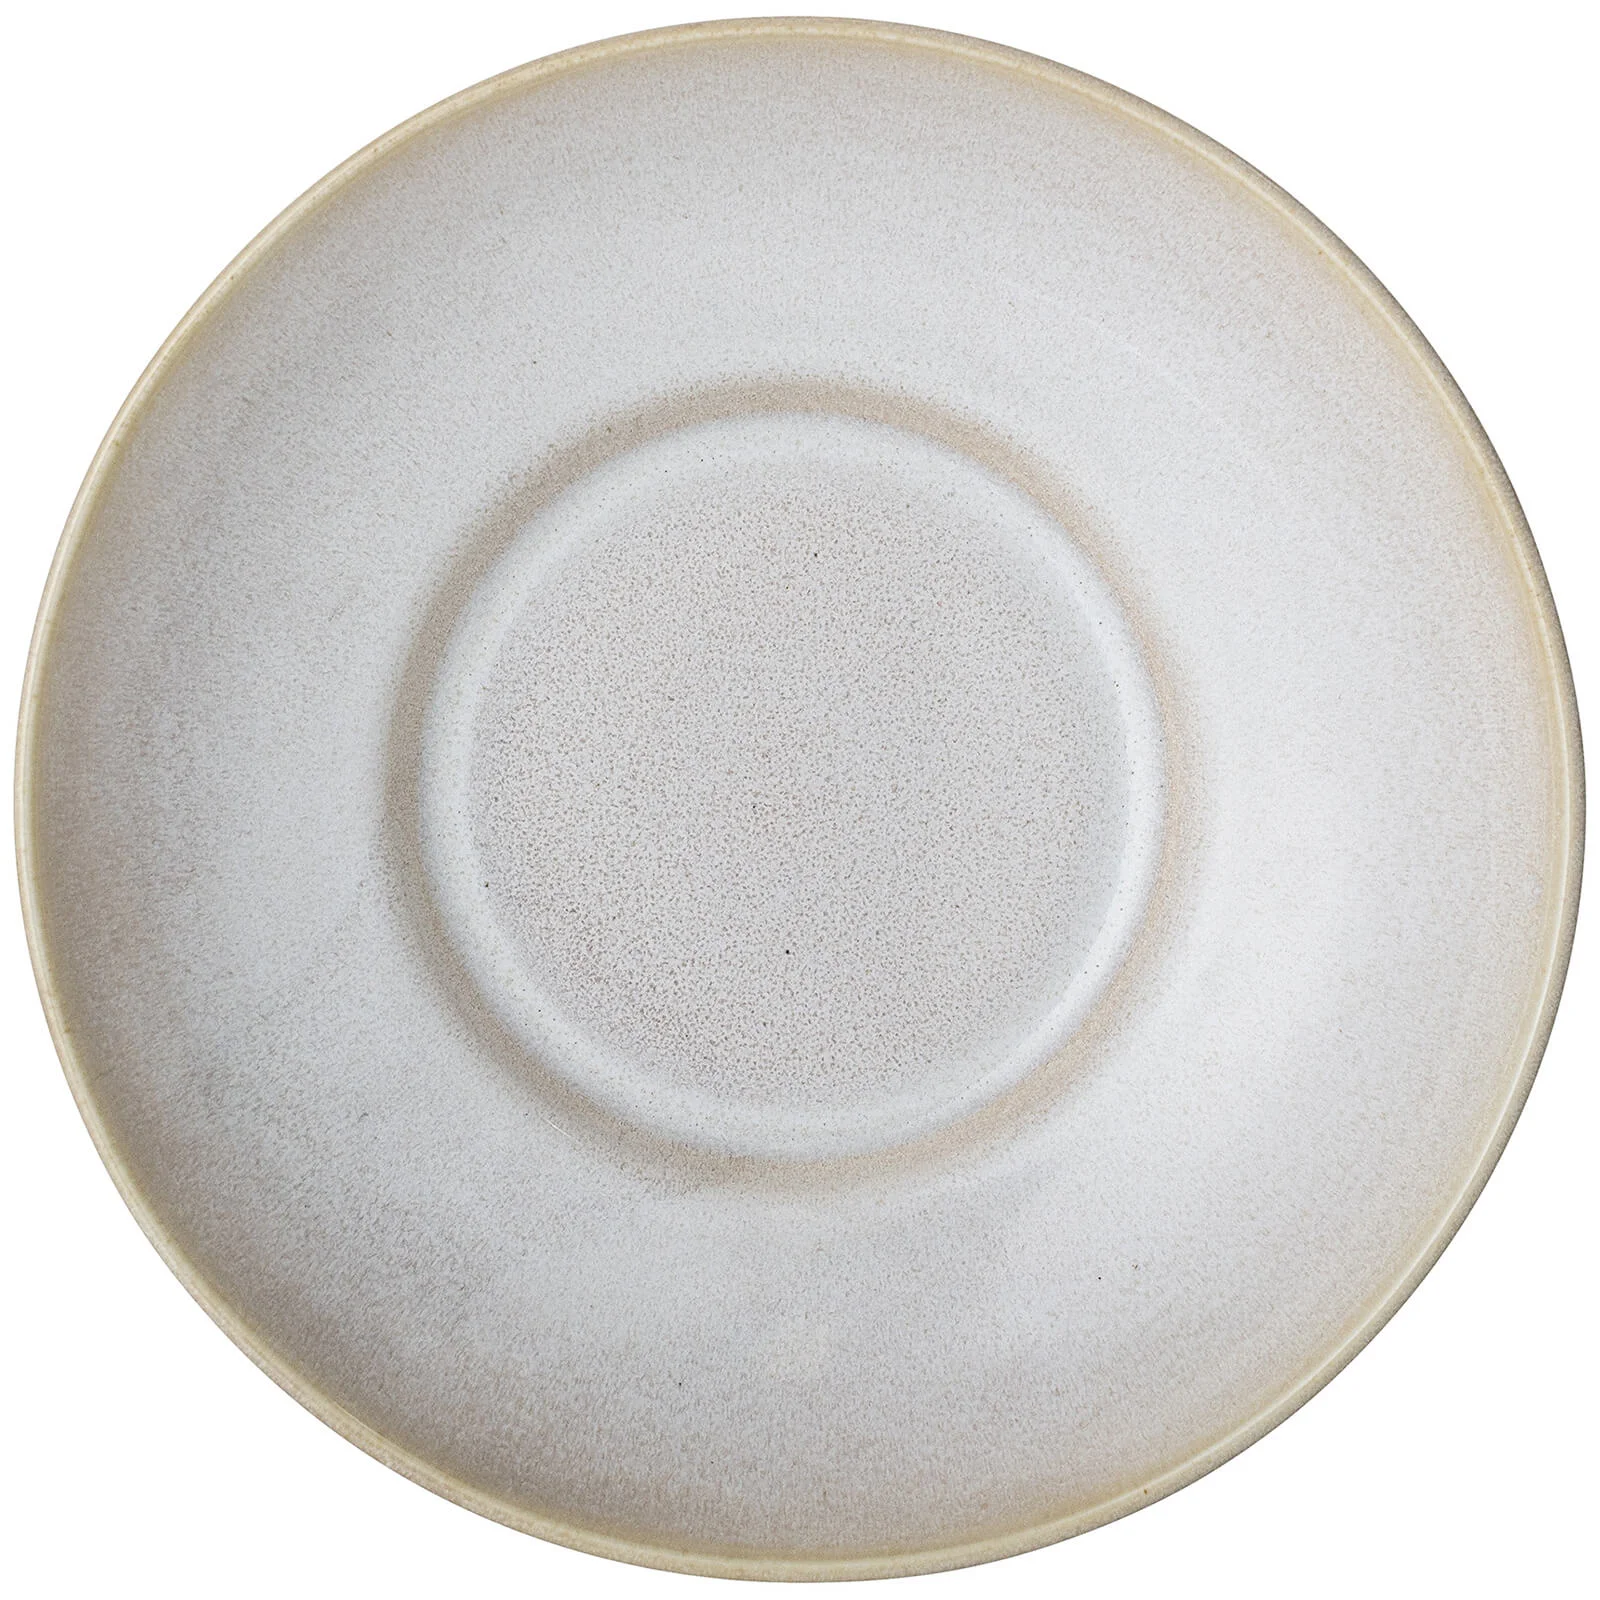 Bloomingville Carrie Stoneware Serving Bowl - Nature Image 1